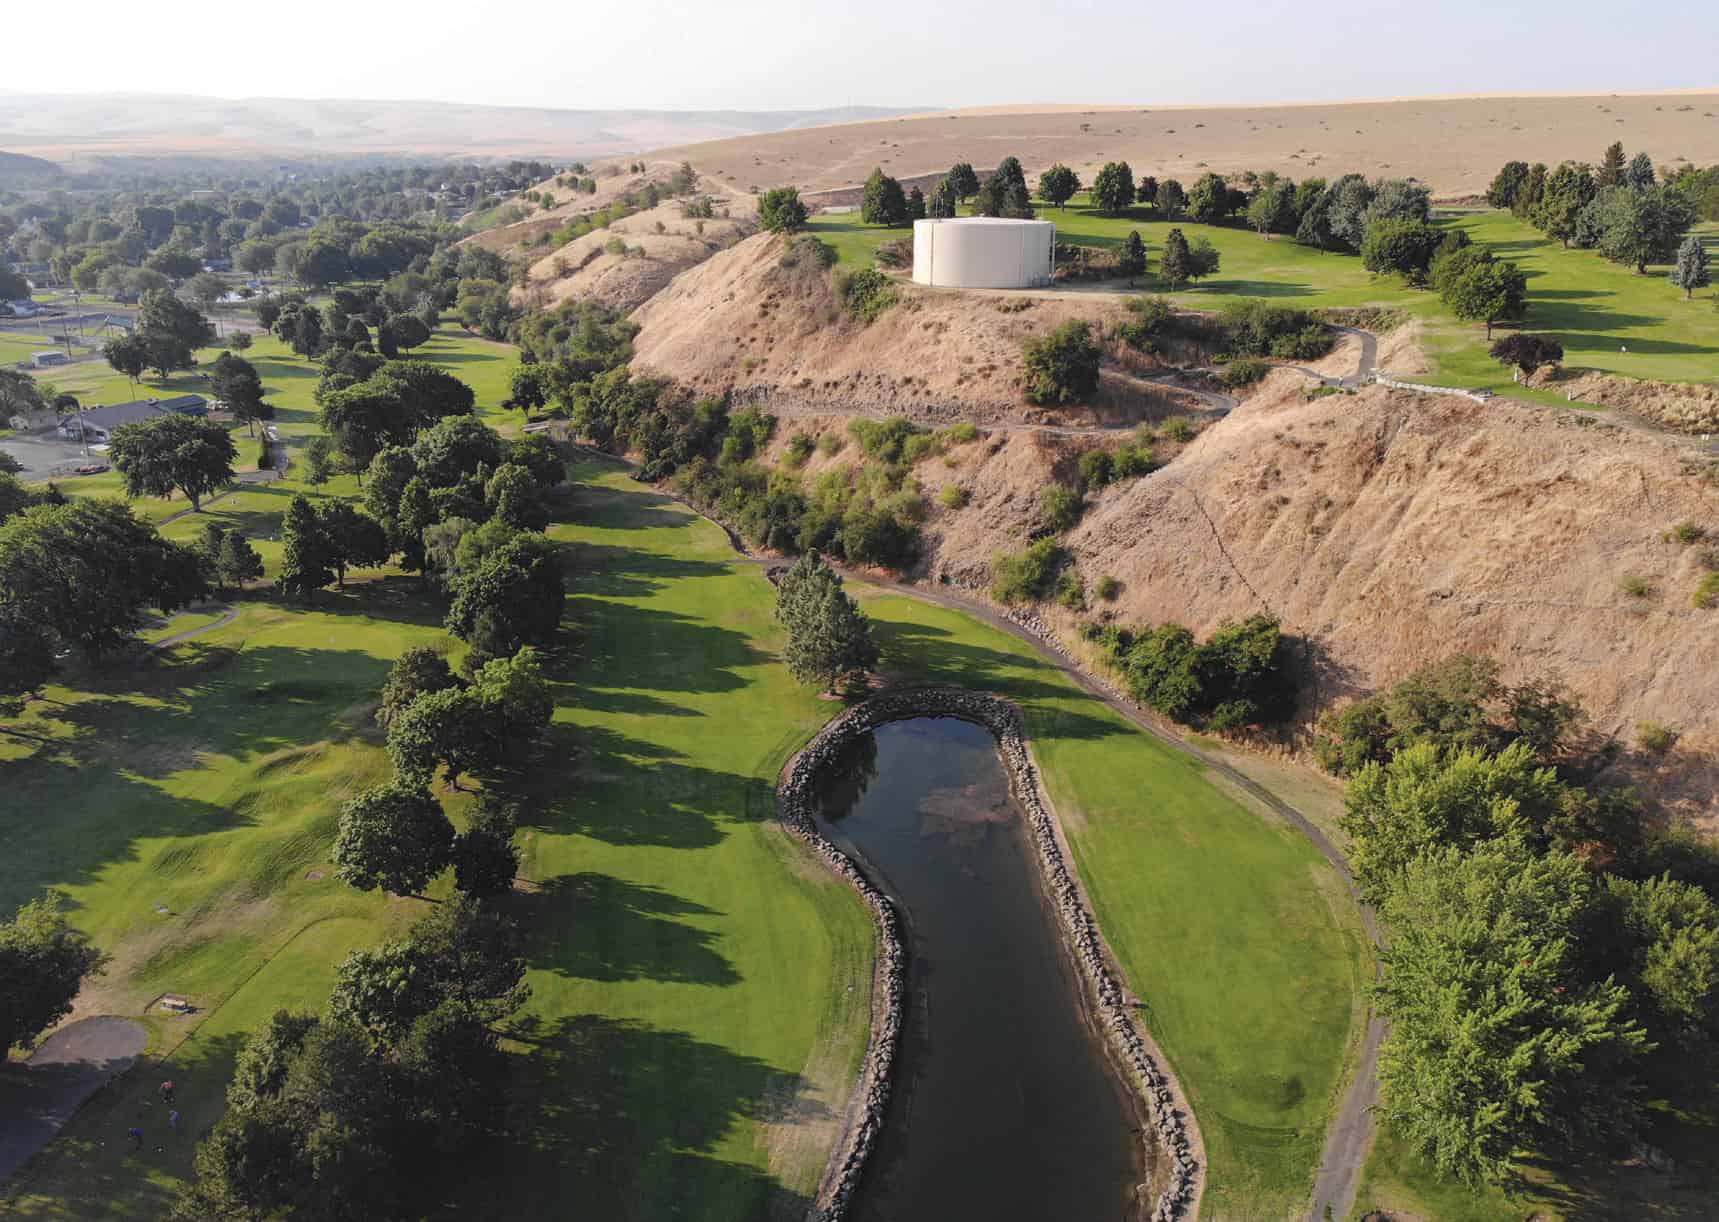 The Milton-Freewater Golf Course puts the valley on display.